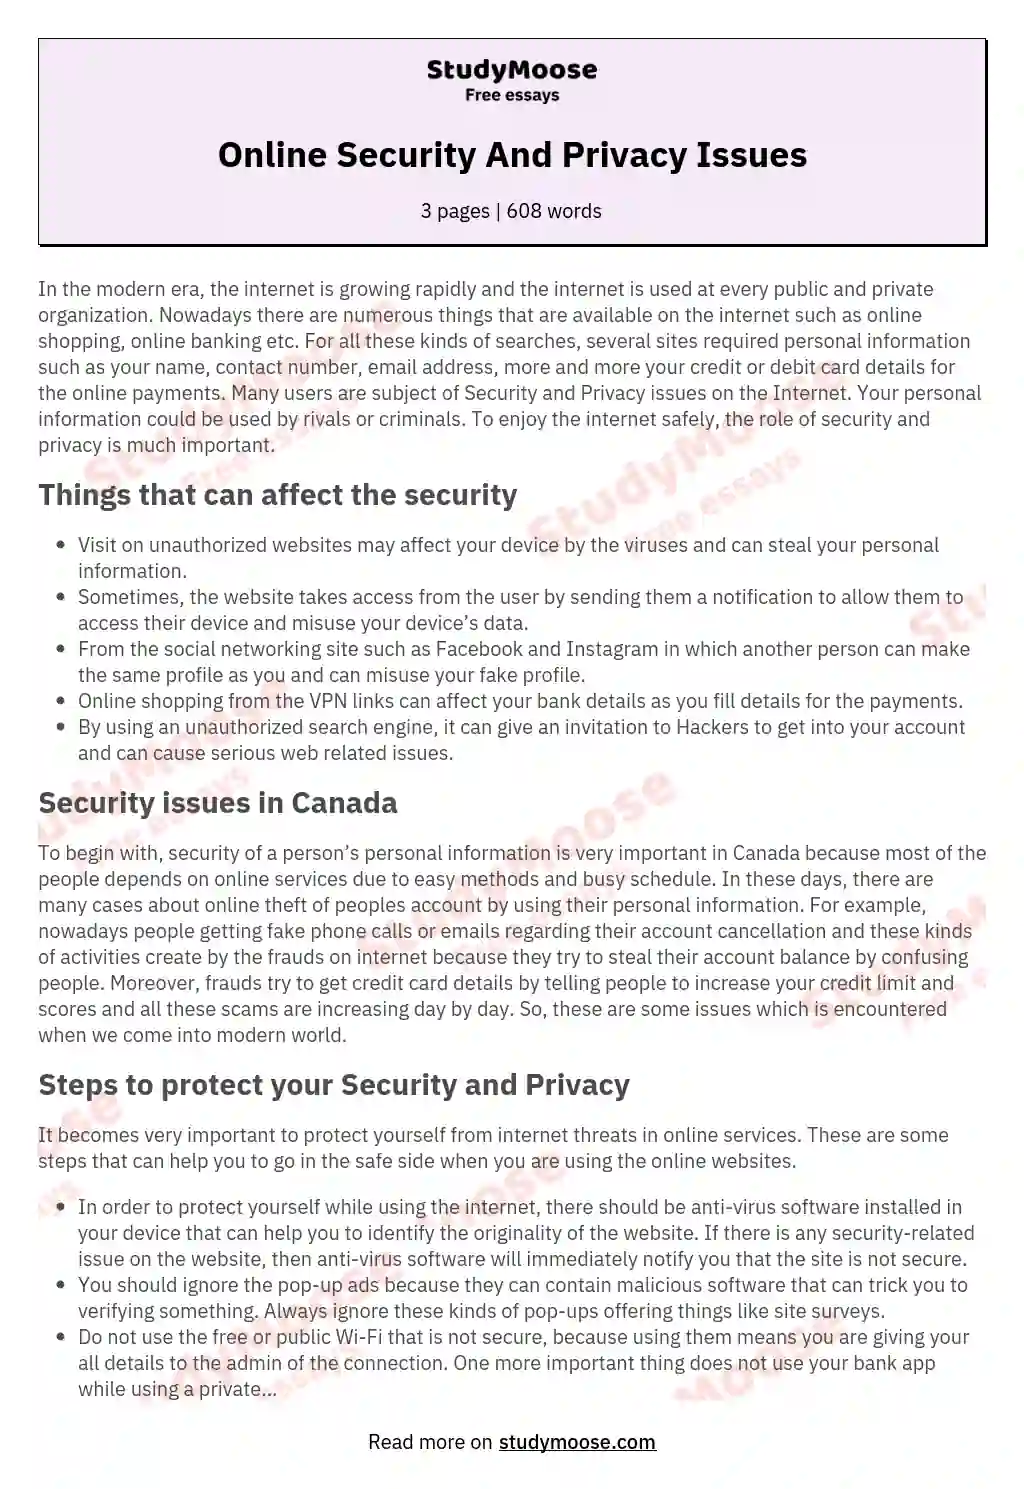 Online Security And Privacy Issues essay